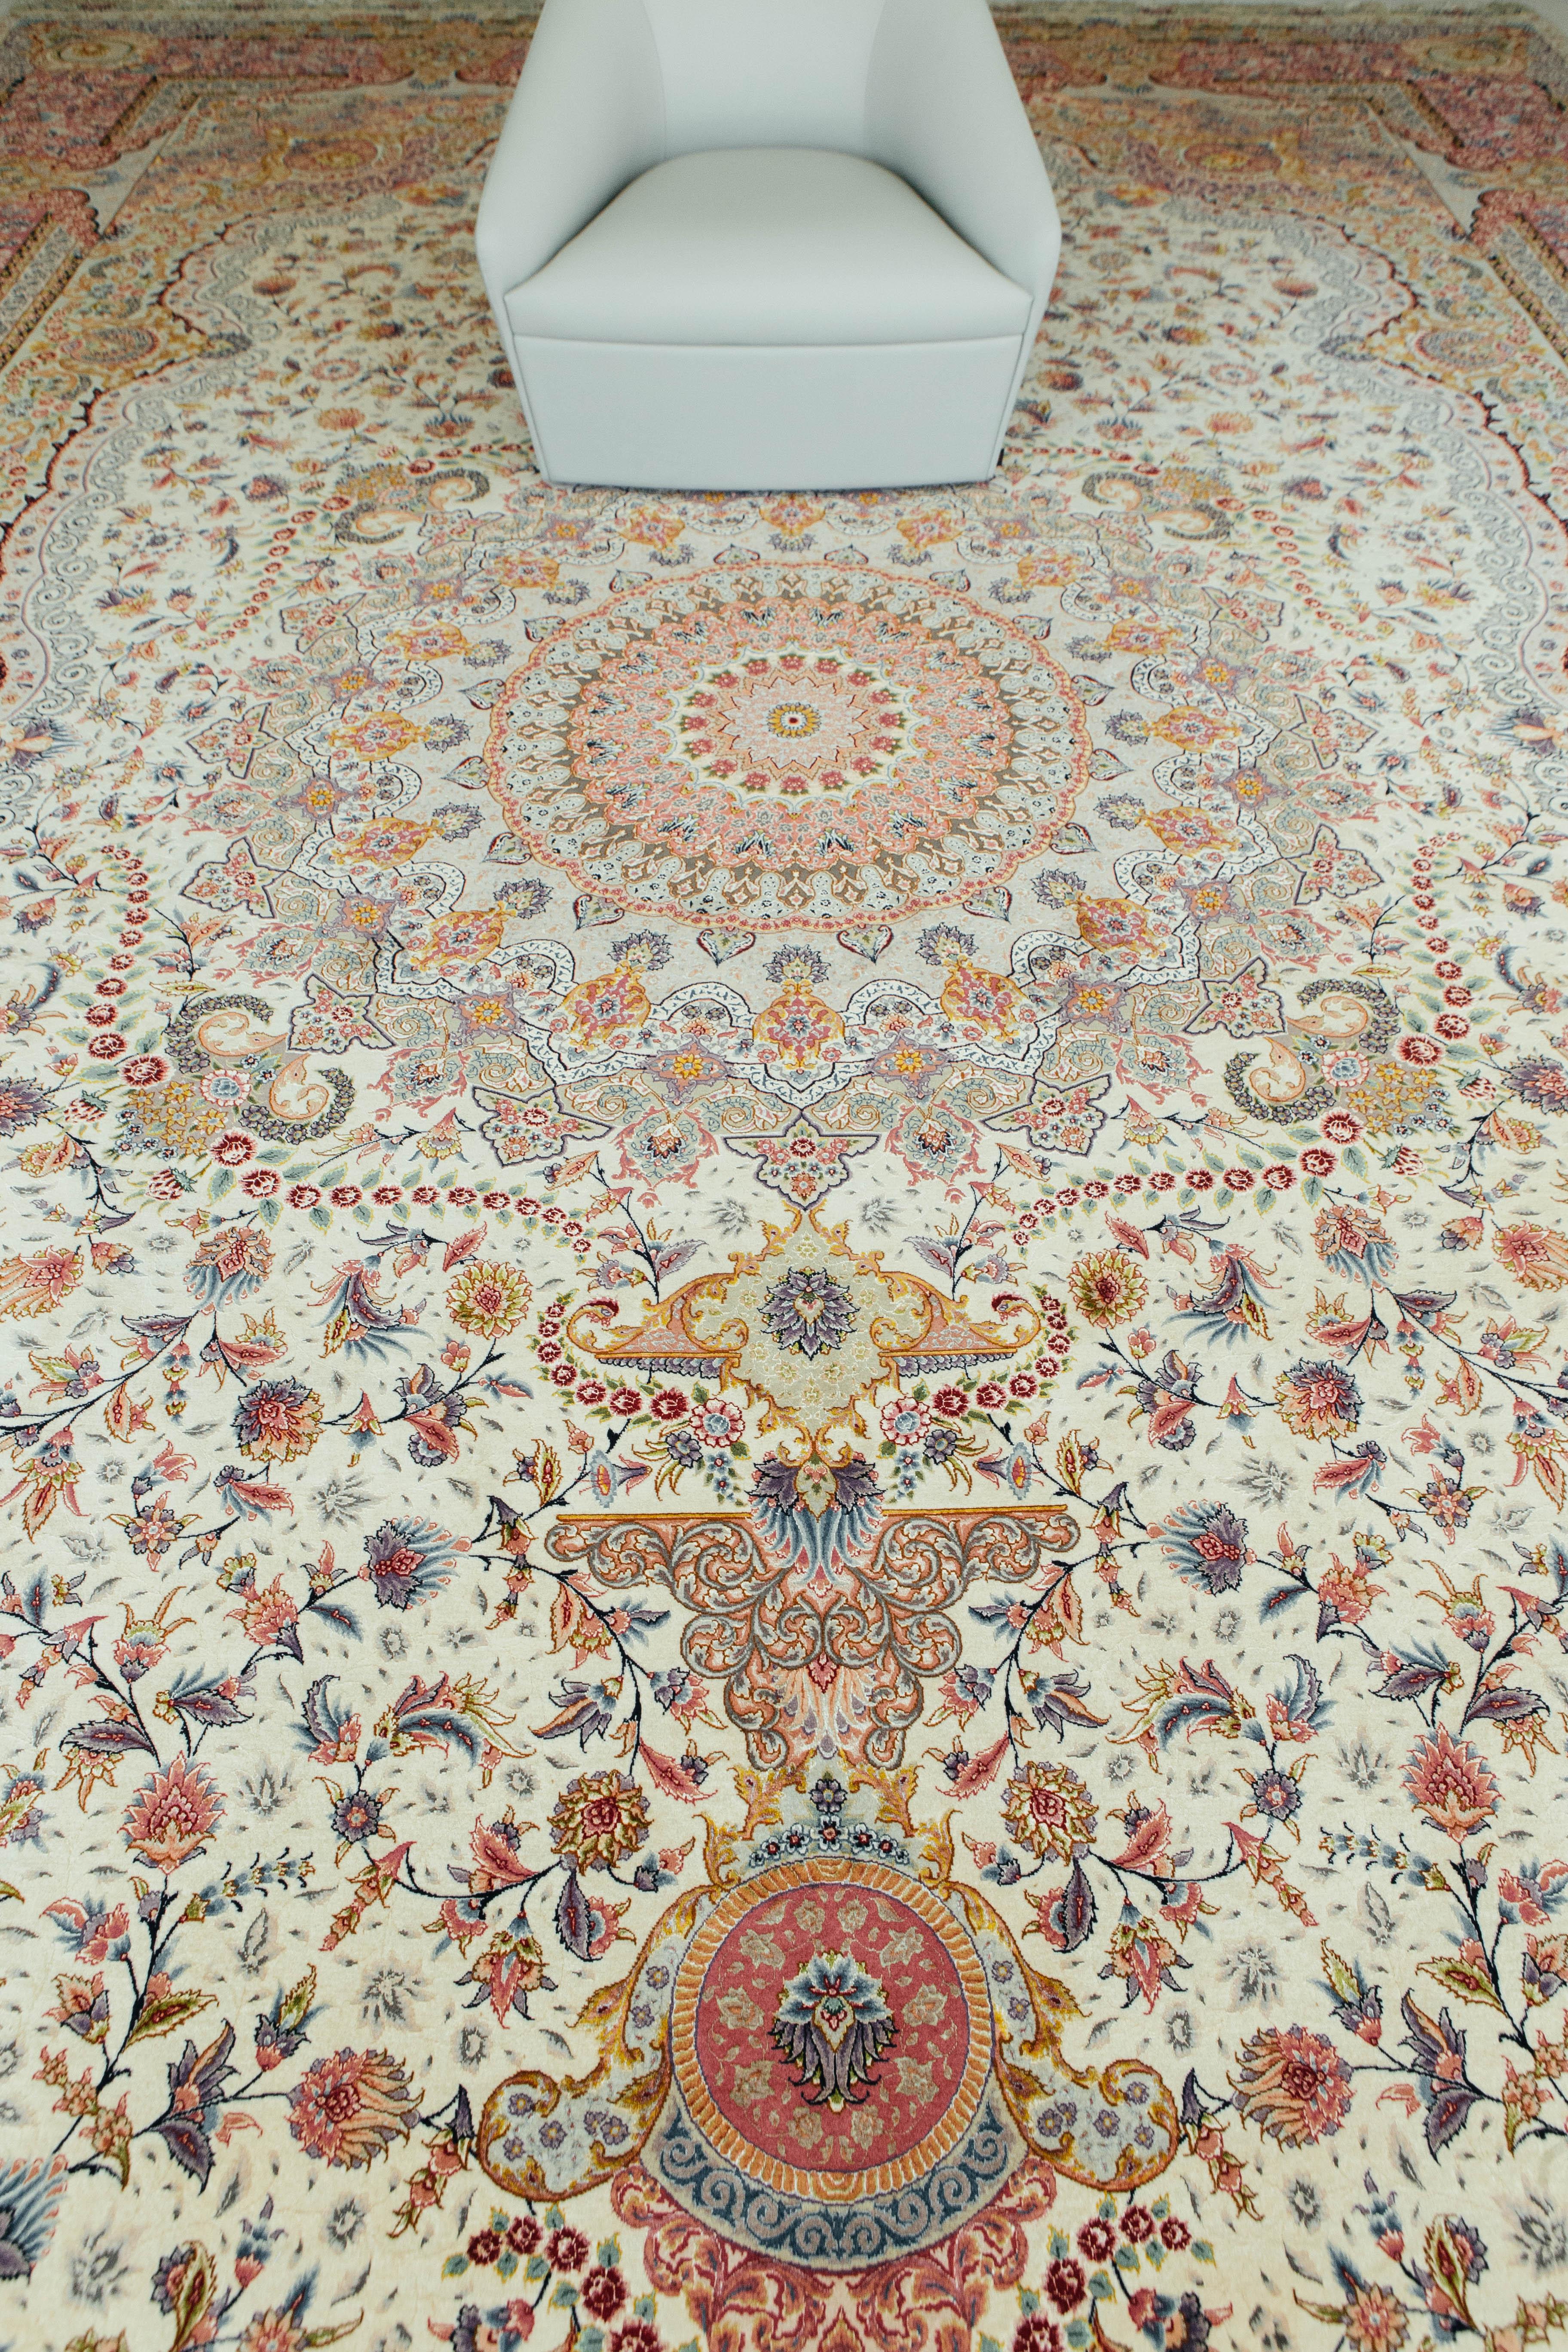 A gorgeous Persian Tabriz rug designed, woven, and signed by master weaver of Tabriz, Jalilnia. This fine wool and silk piece is nothing short of a masterful work of art. Weaved with fine knots are beautifully detailed floral scrolls and vibrant